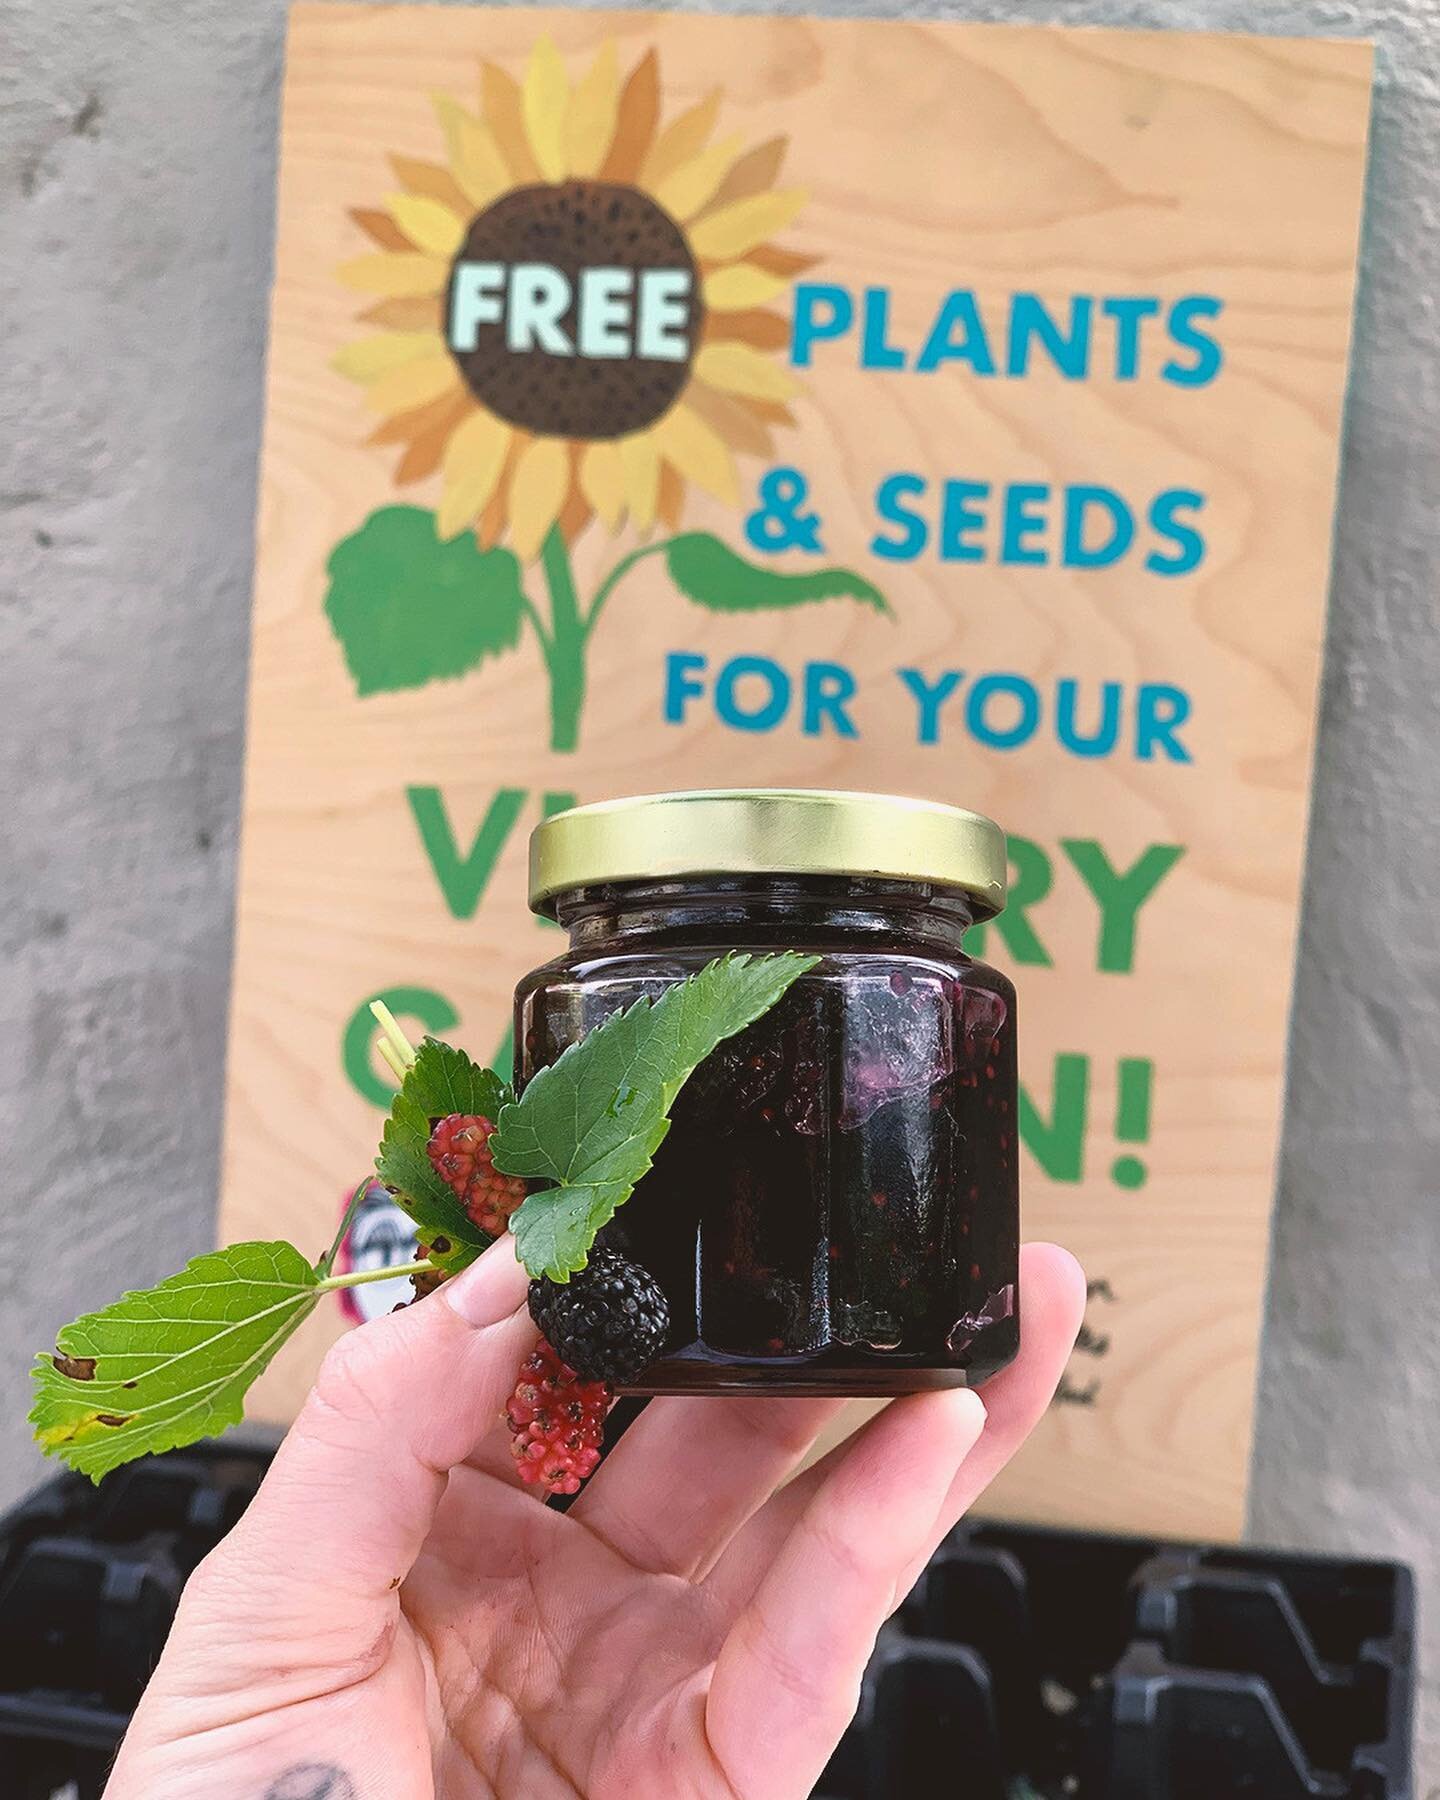 🎊 giveaway!!!! 🎊 I have three jars of ~*~fresh~* mulberry jam for three lucky winners today. The tree out front has been raining juicy berries so I&rsquo;m passing along the goodness to my neighbors! 😋💜
.
.
.
.
Last night I served this on some op